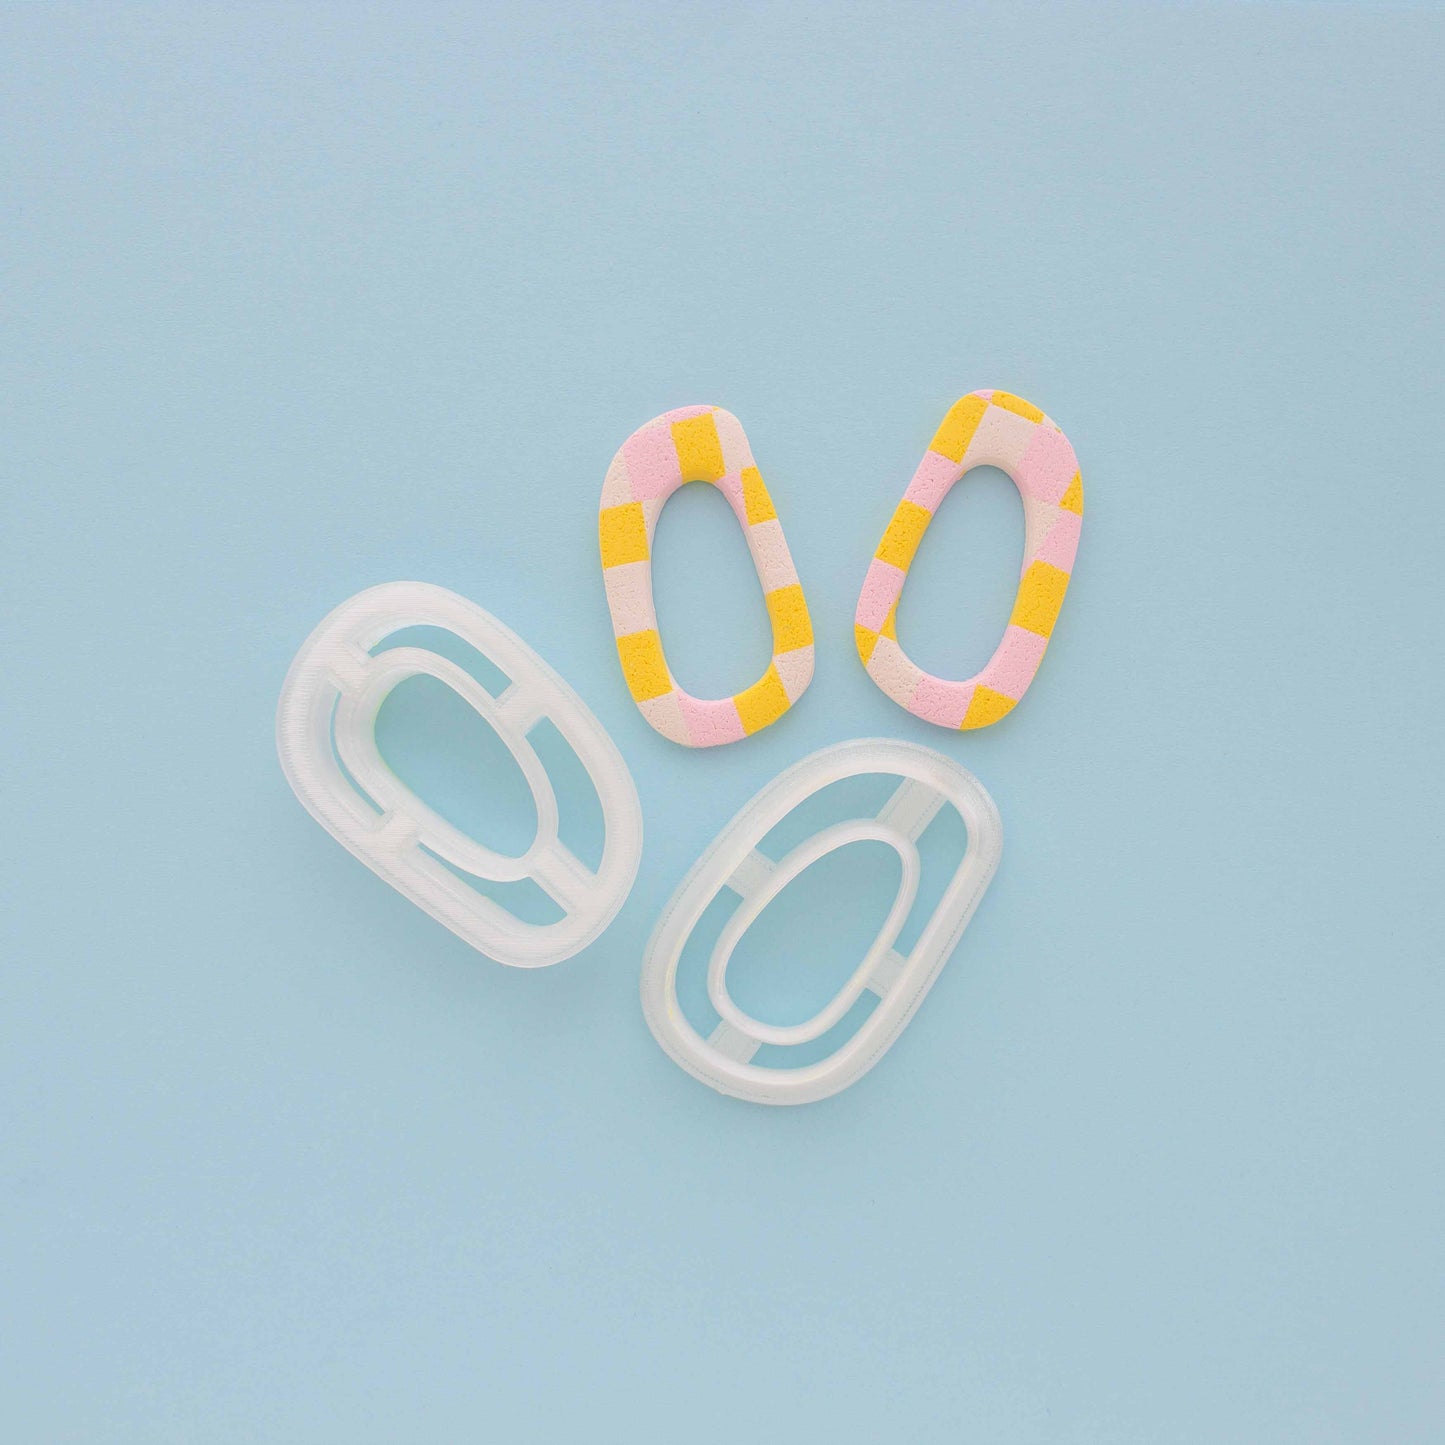 Two abstract hoop earrings and polymer clay cutters in a light blue background